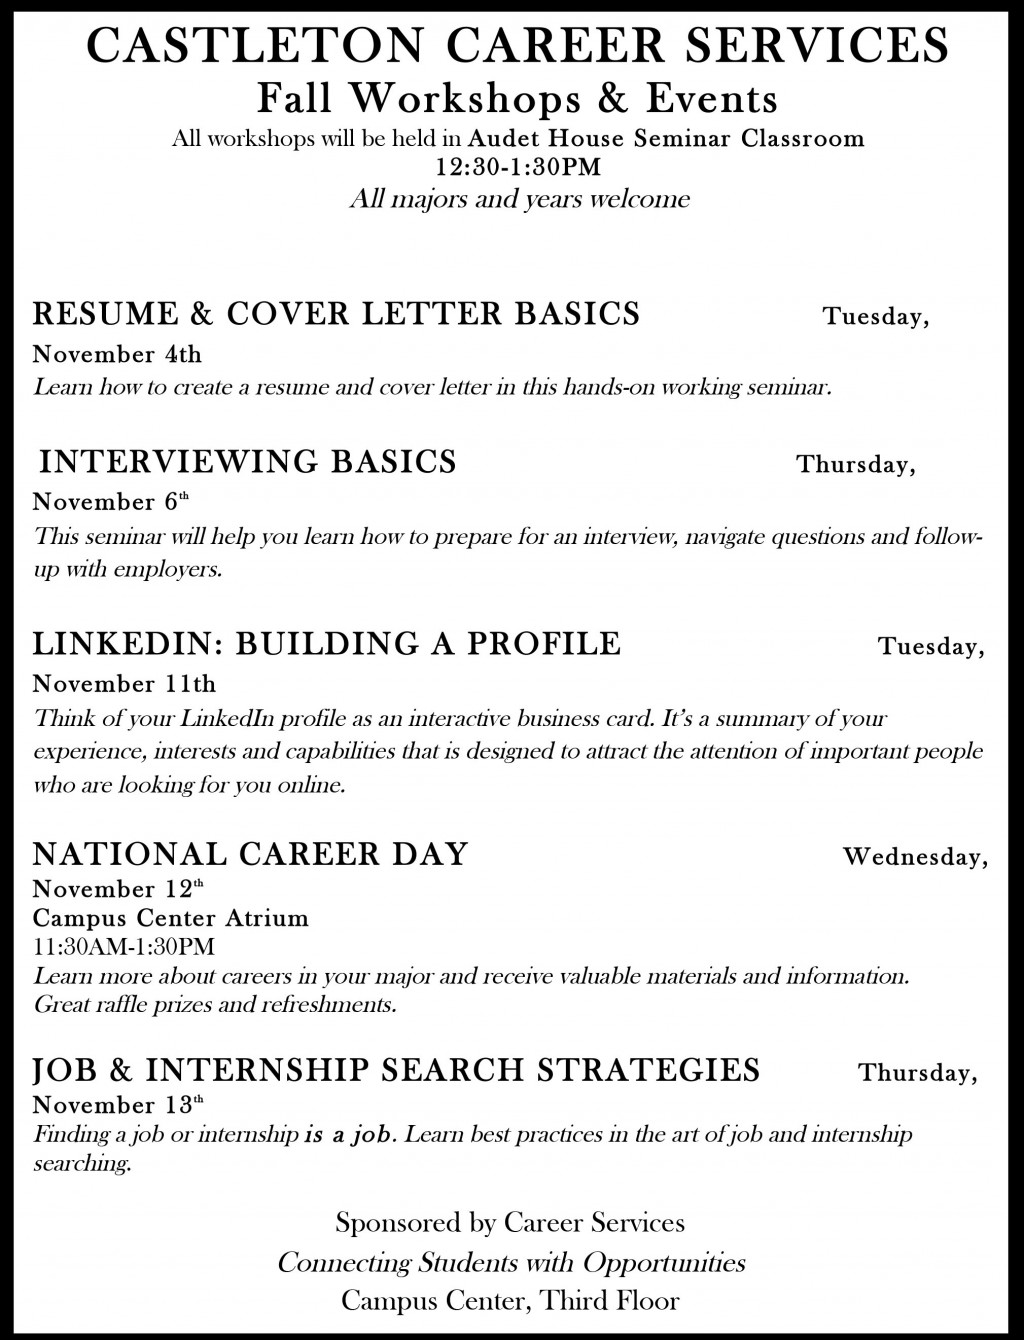 National Career Day